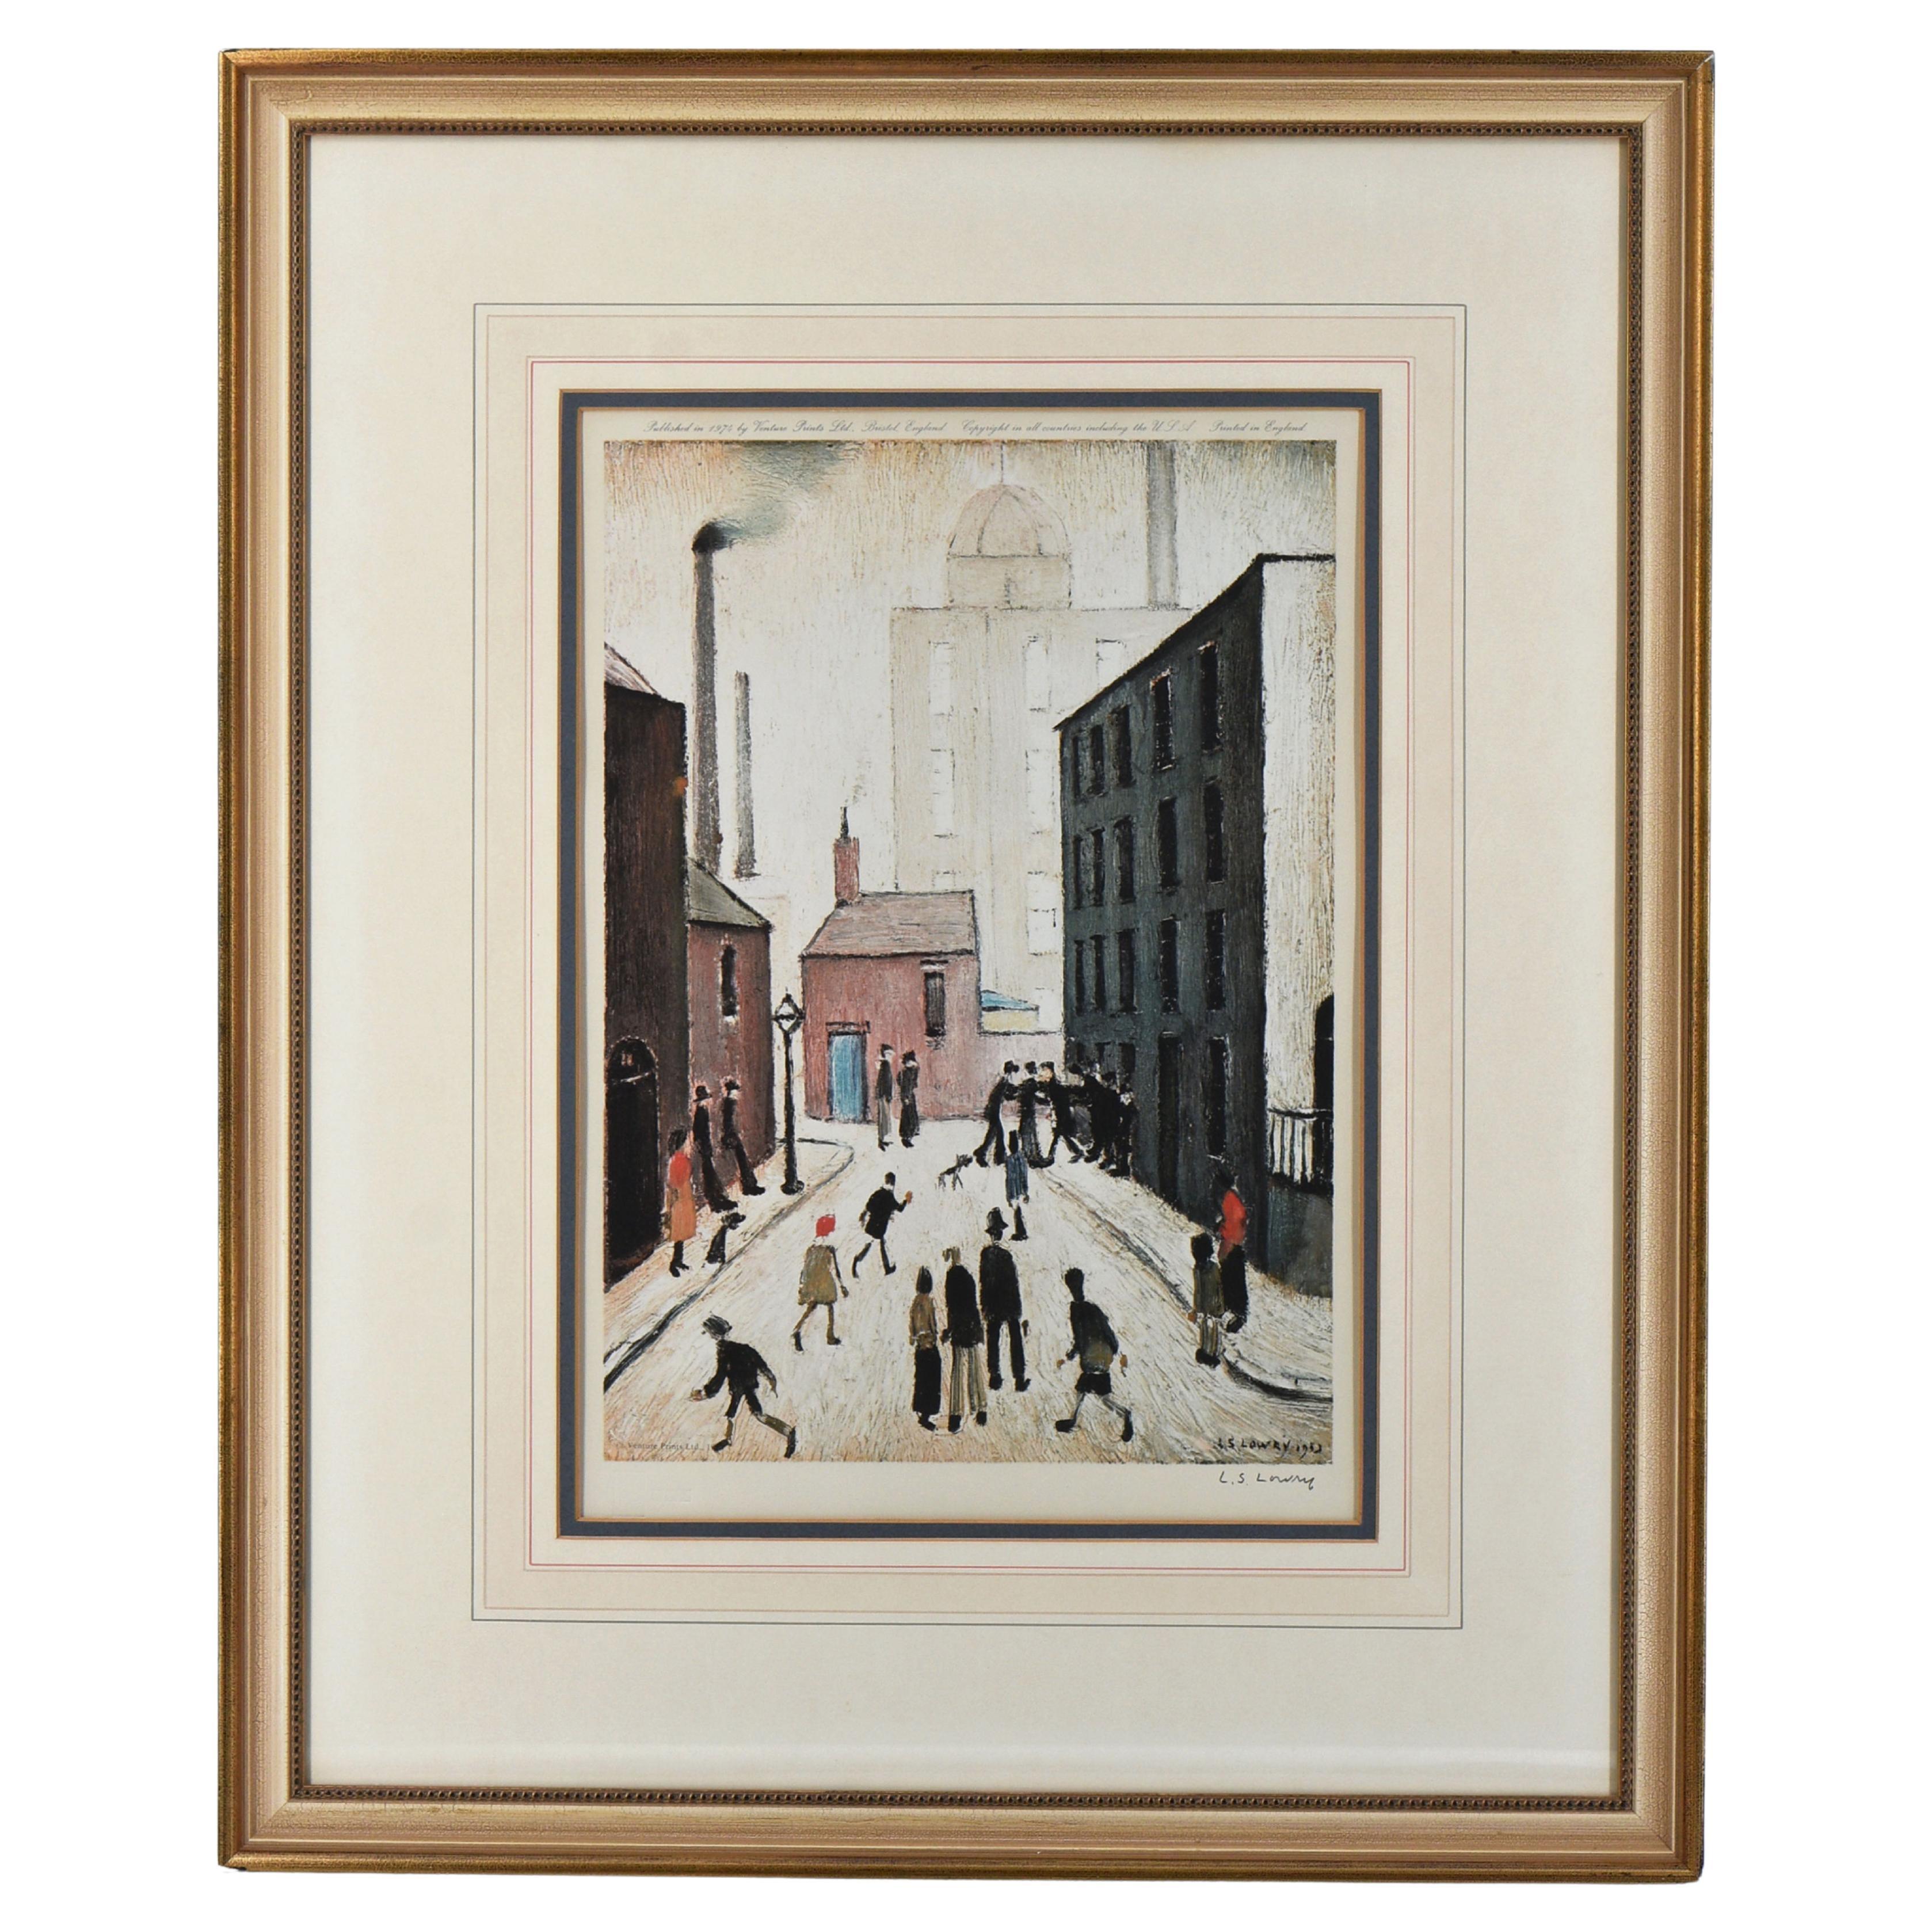 L S Lowry Signed Limited Edition Venture Print "Industrial Scene", 1974